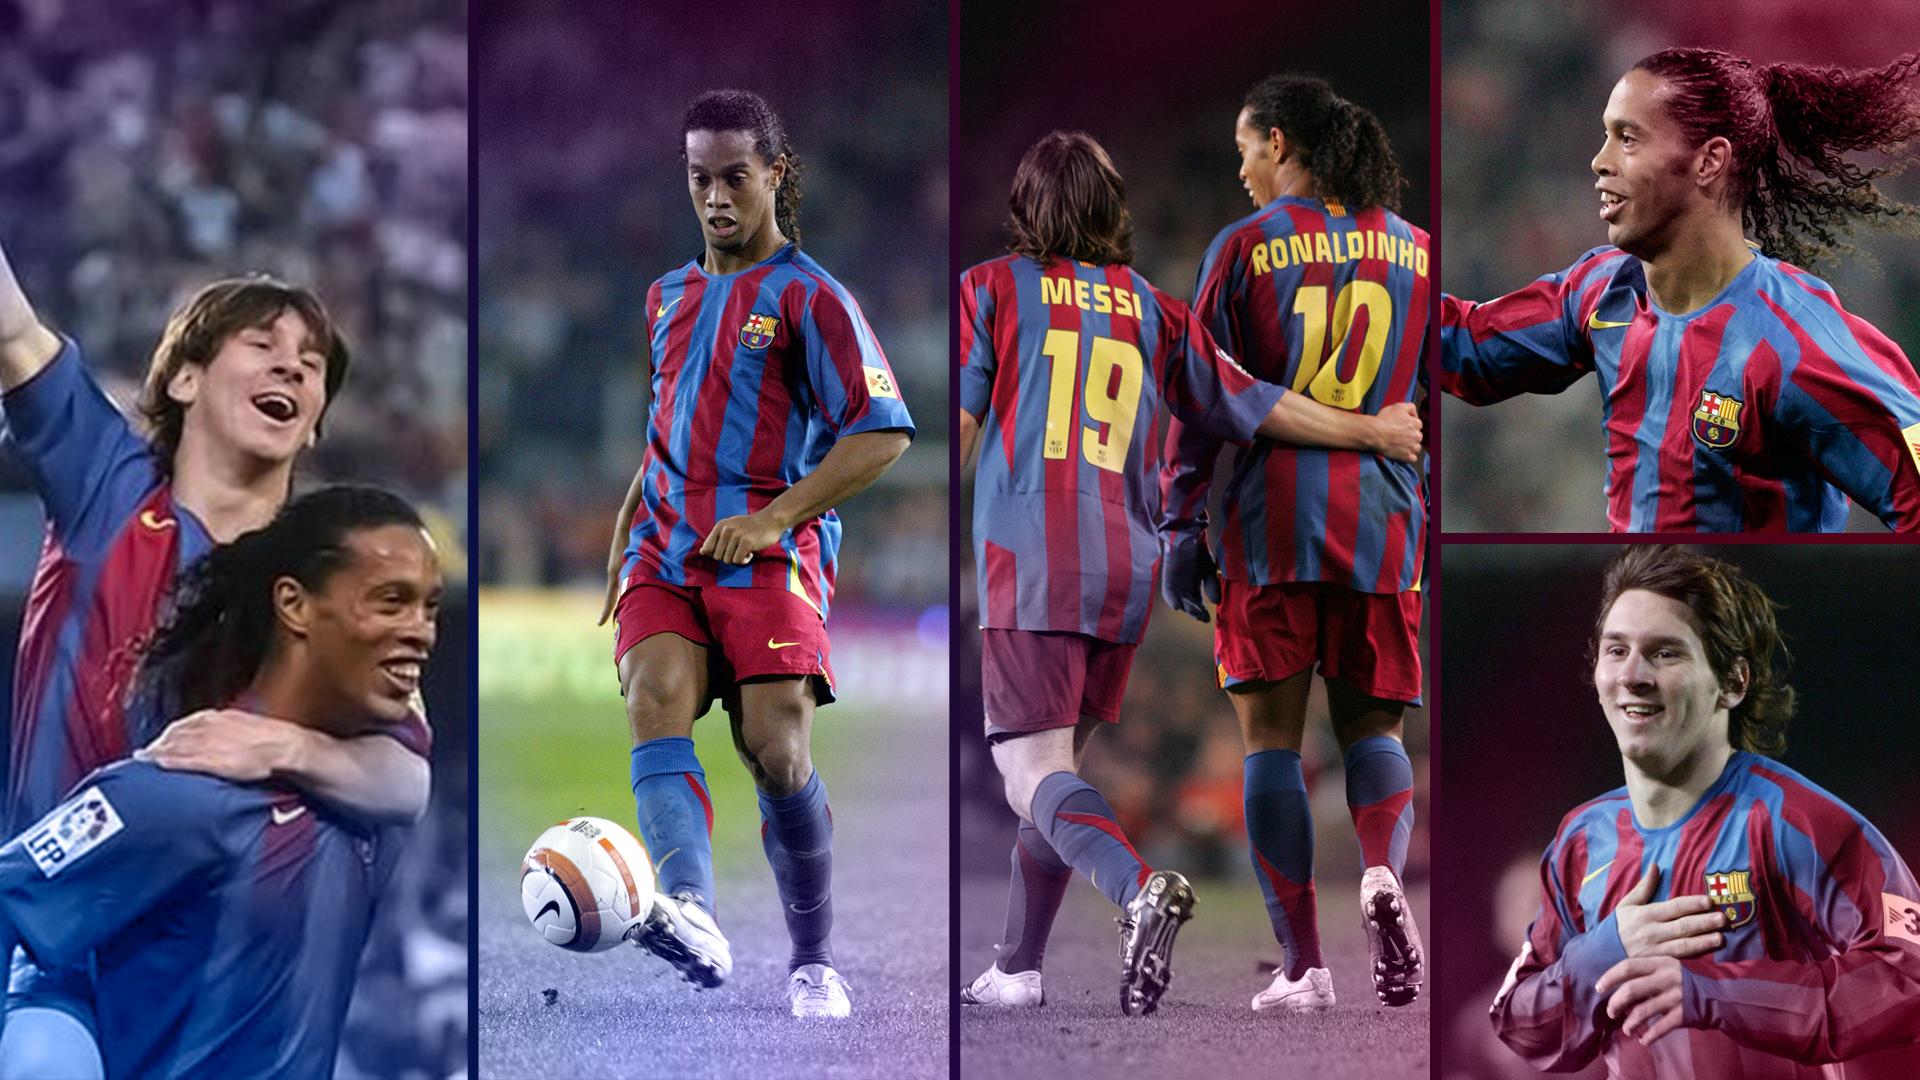 Messi and Ronaldinho, a lethal combination! 